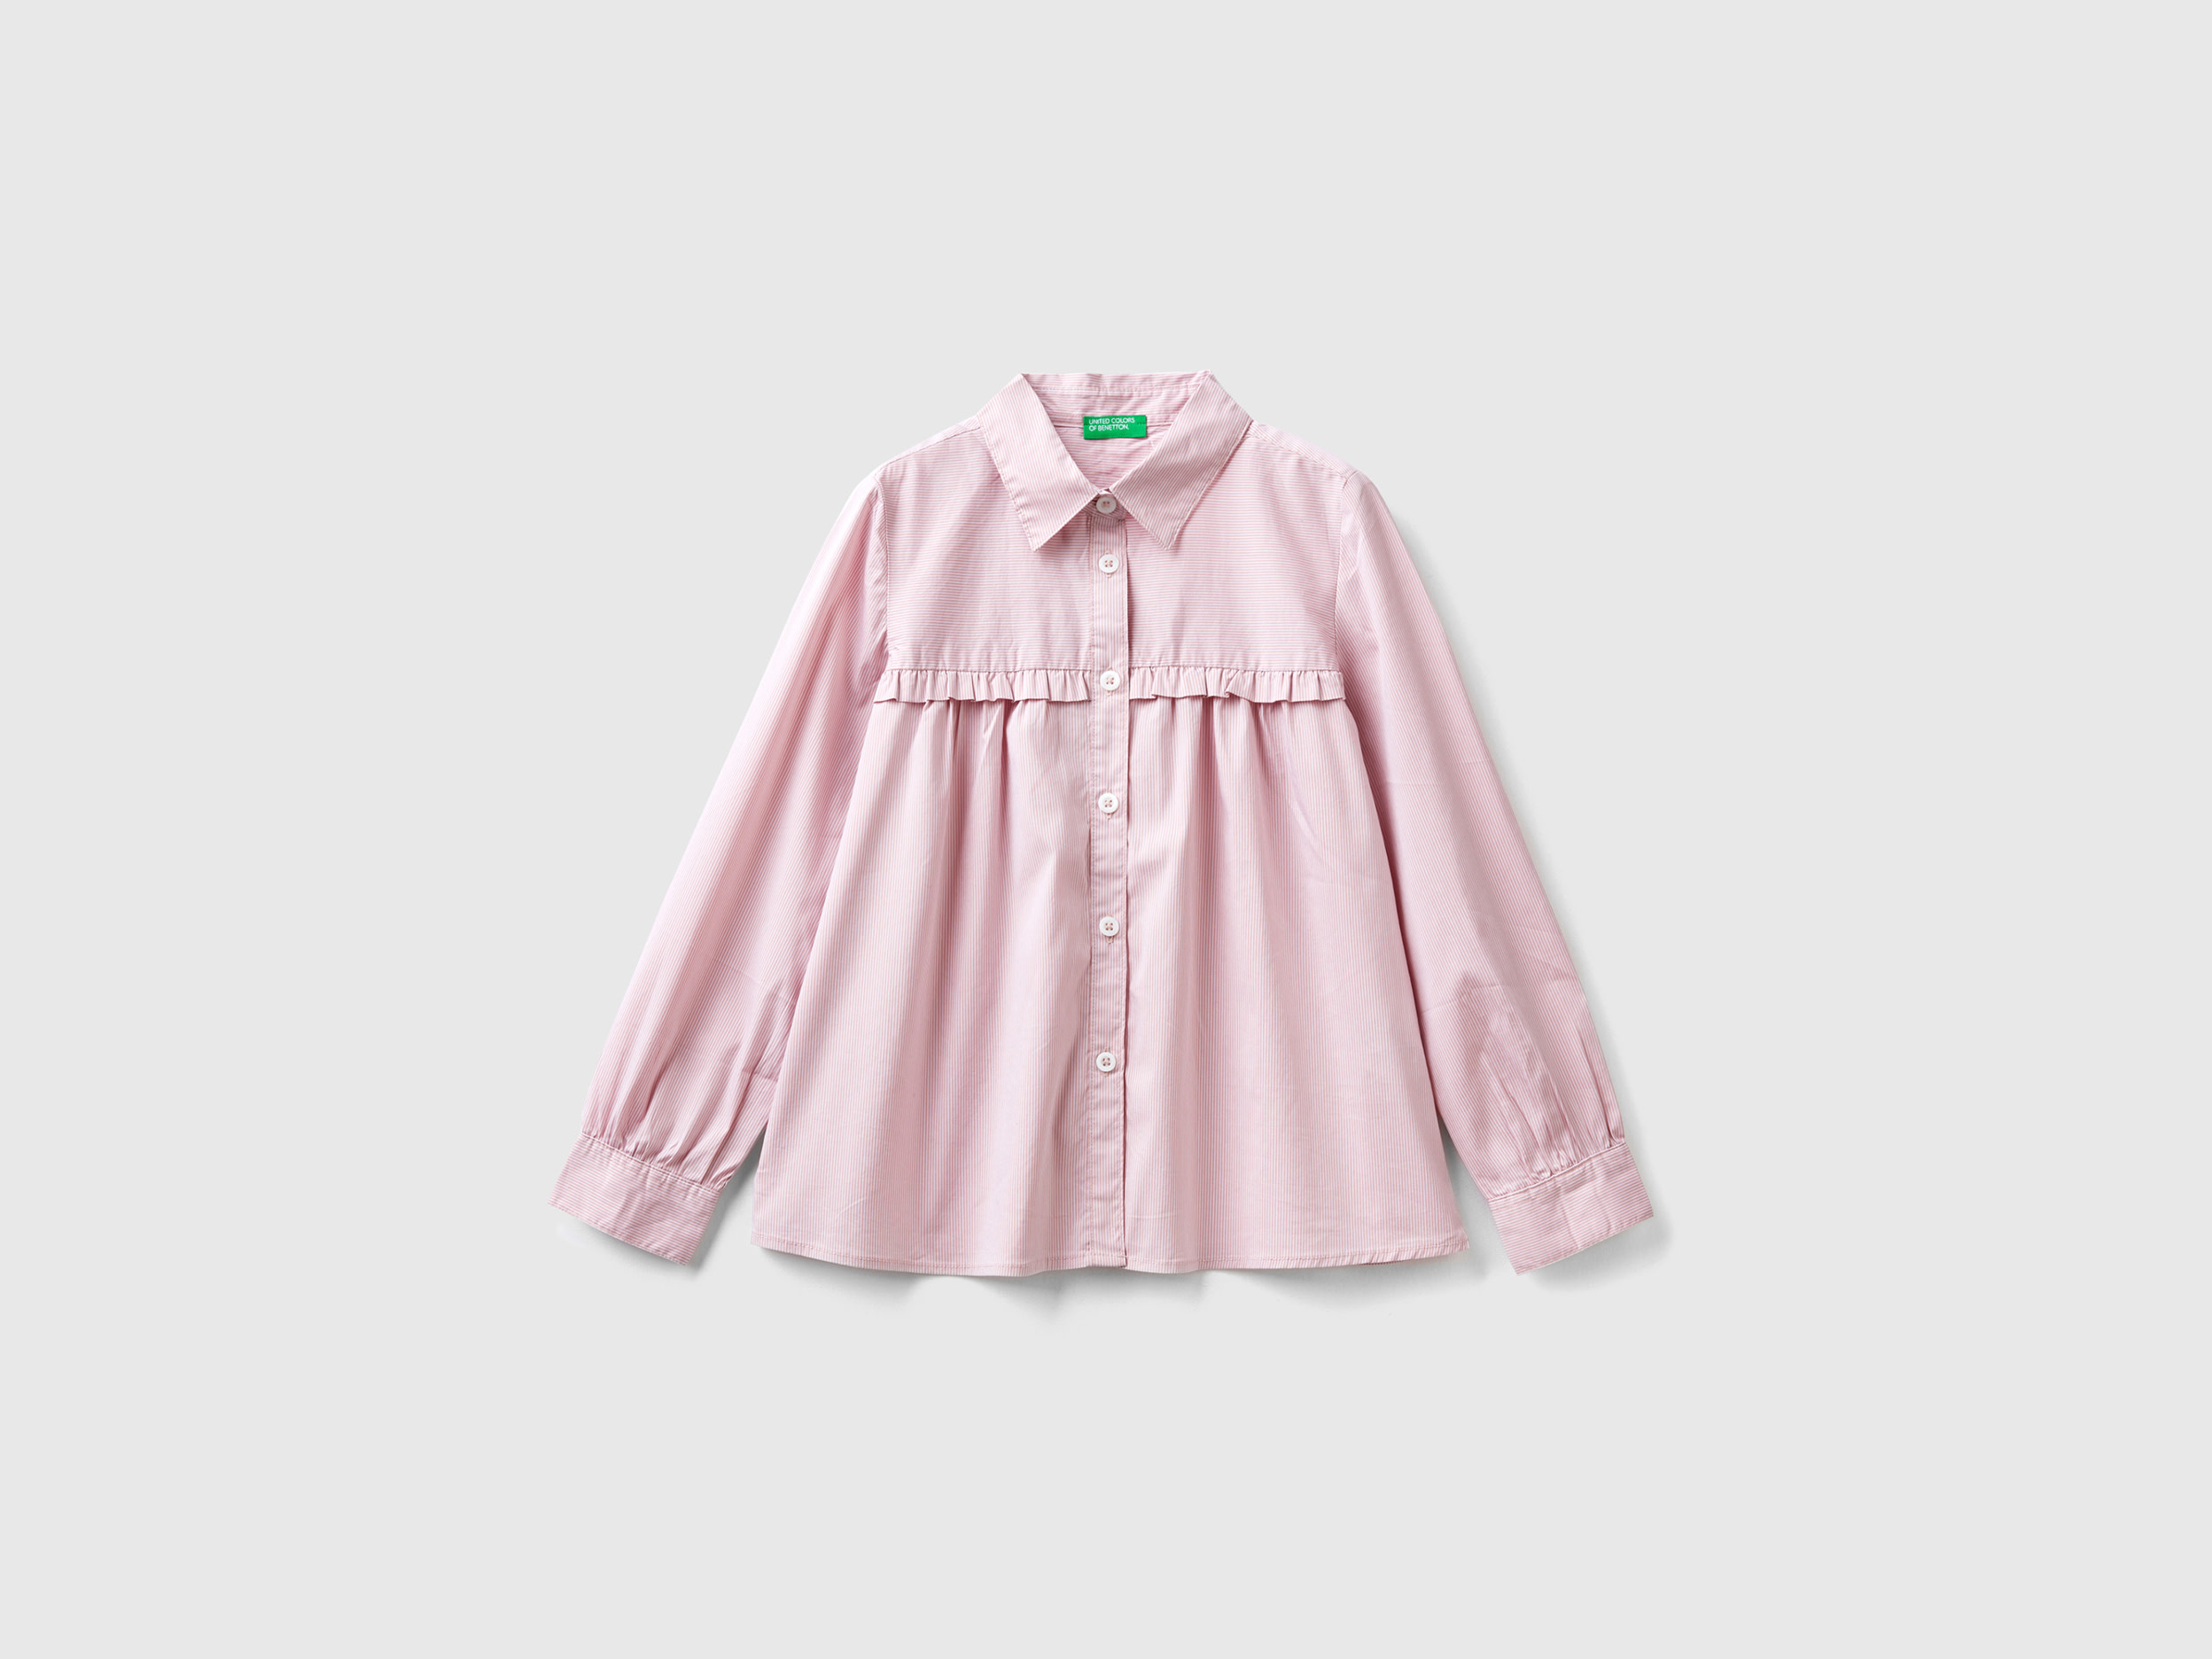 Benetton, Shirt With Rouches On The Yoke, size 3XL, Soft Pink, Kids